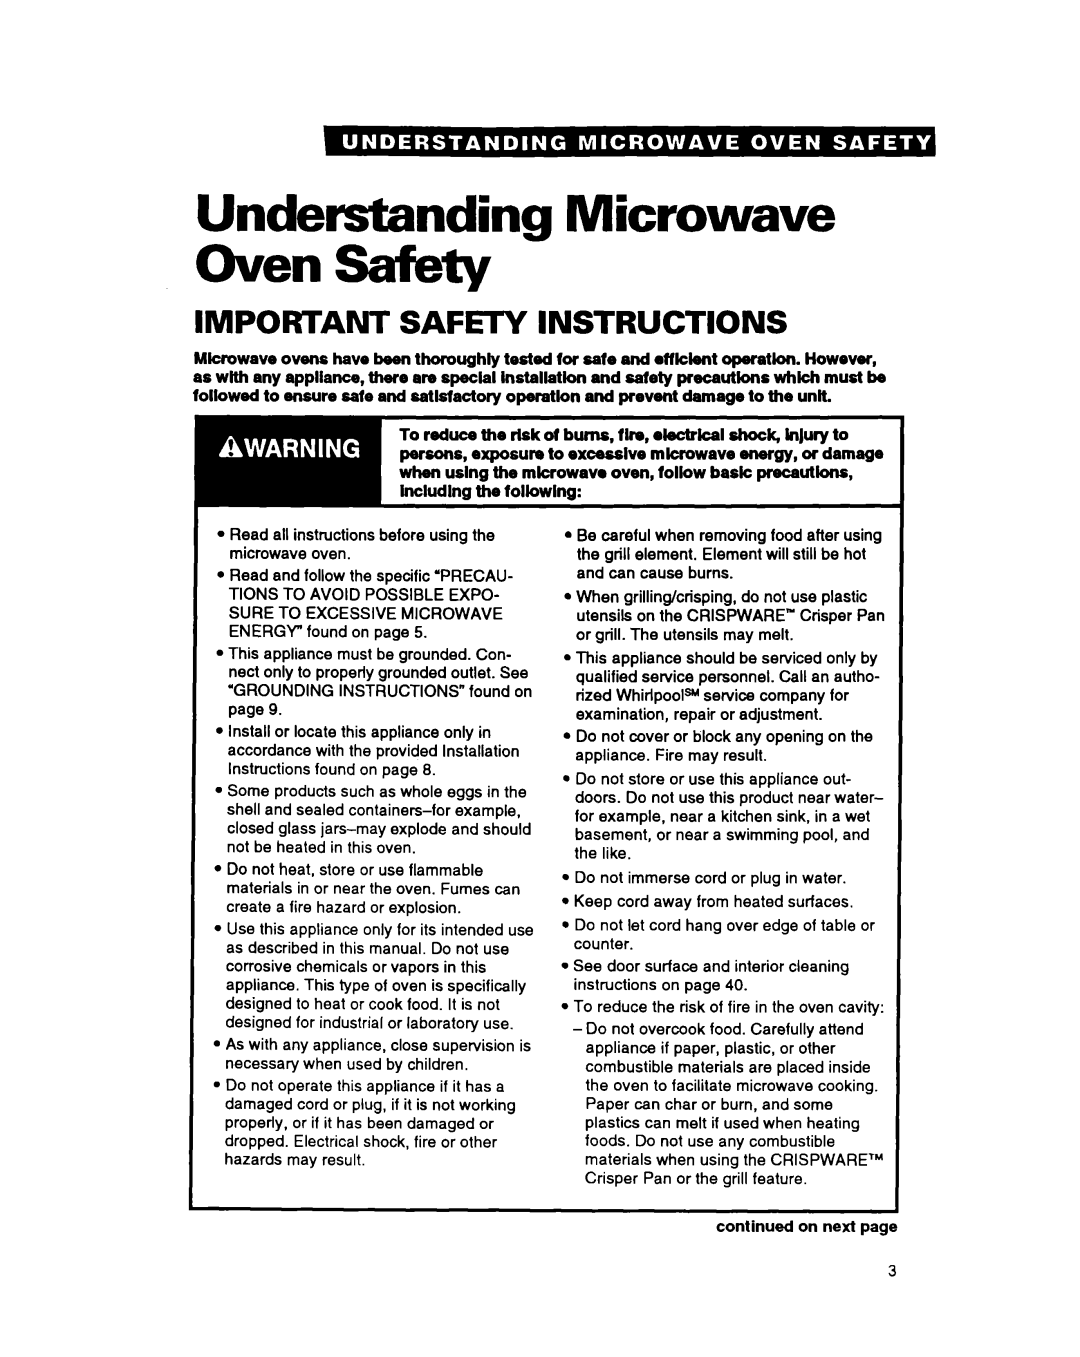 Whirlpool MG3090XAQ, MG207OXAQ Understanding Microwave Oven Safety, Important Safety Instructions, continued on next page 